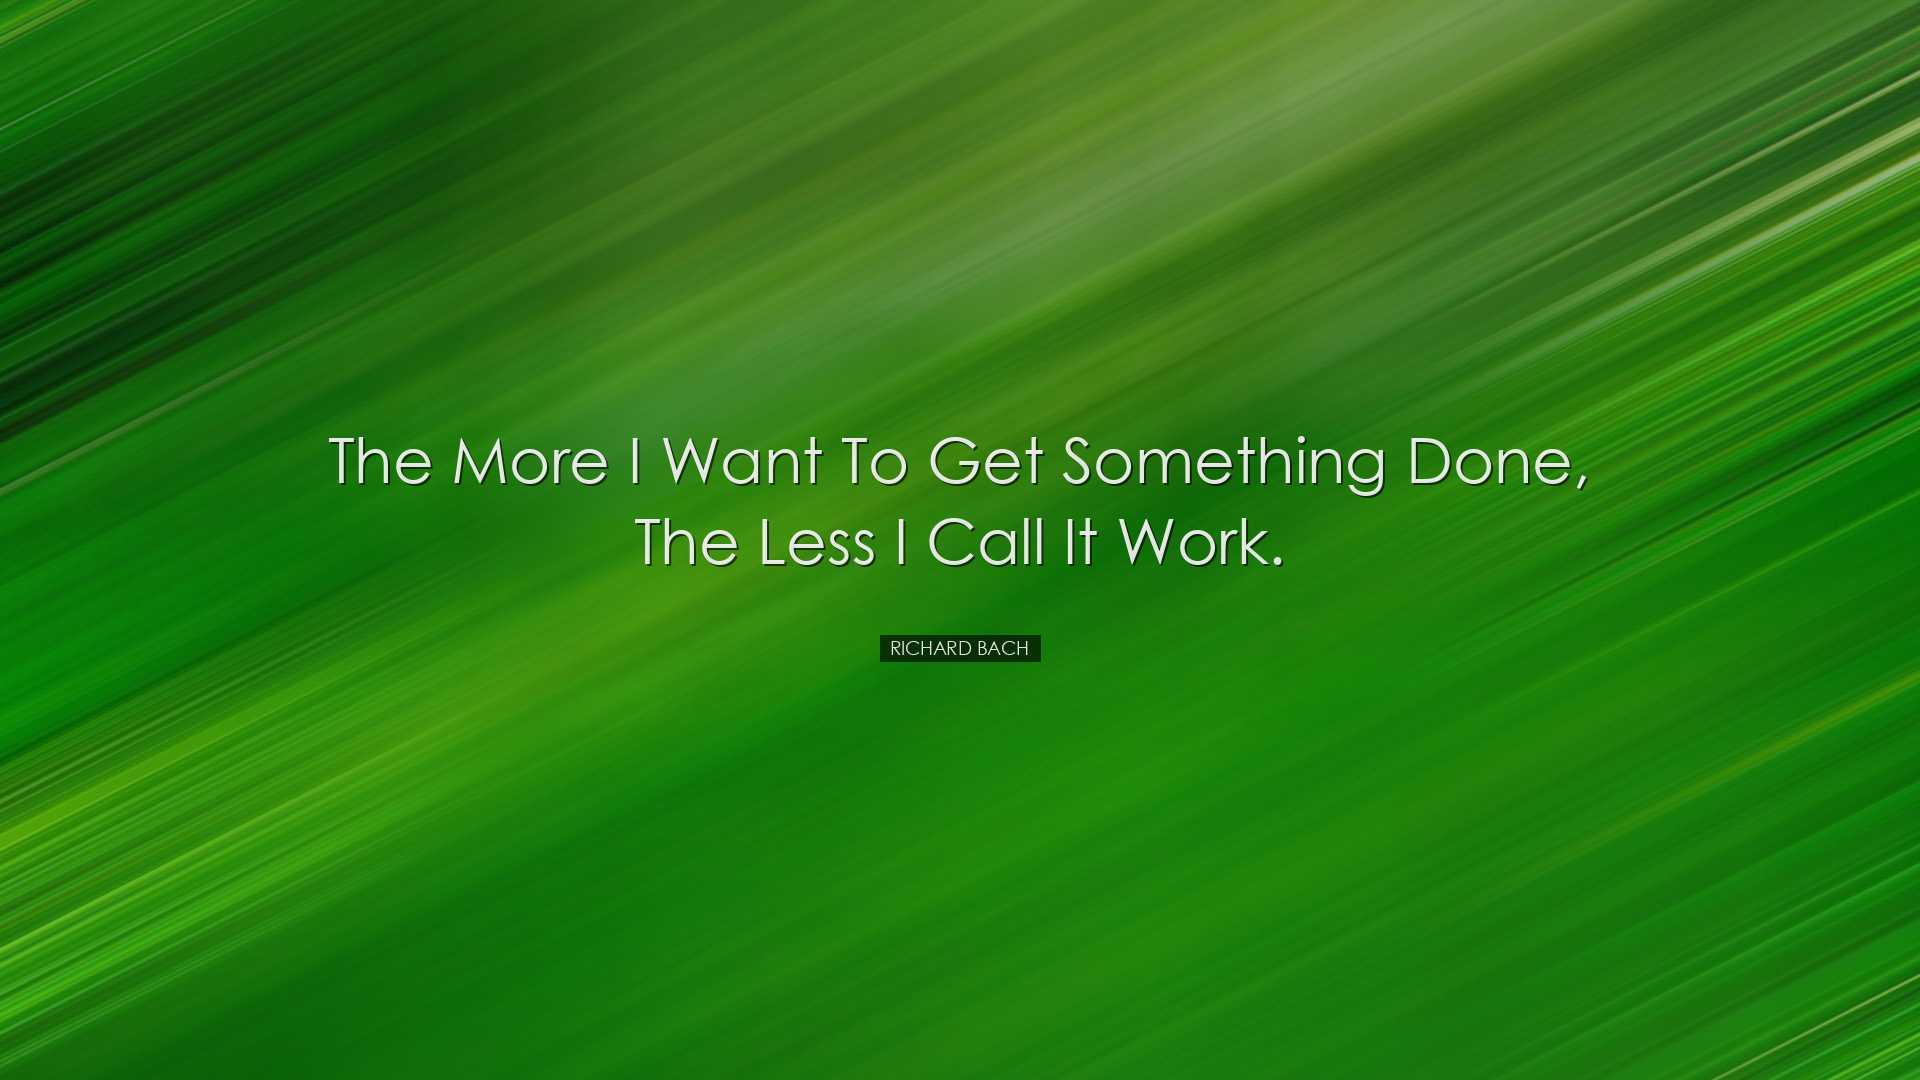 The more I want to get something done, the less I call it work. -